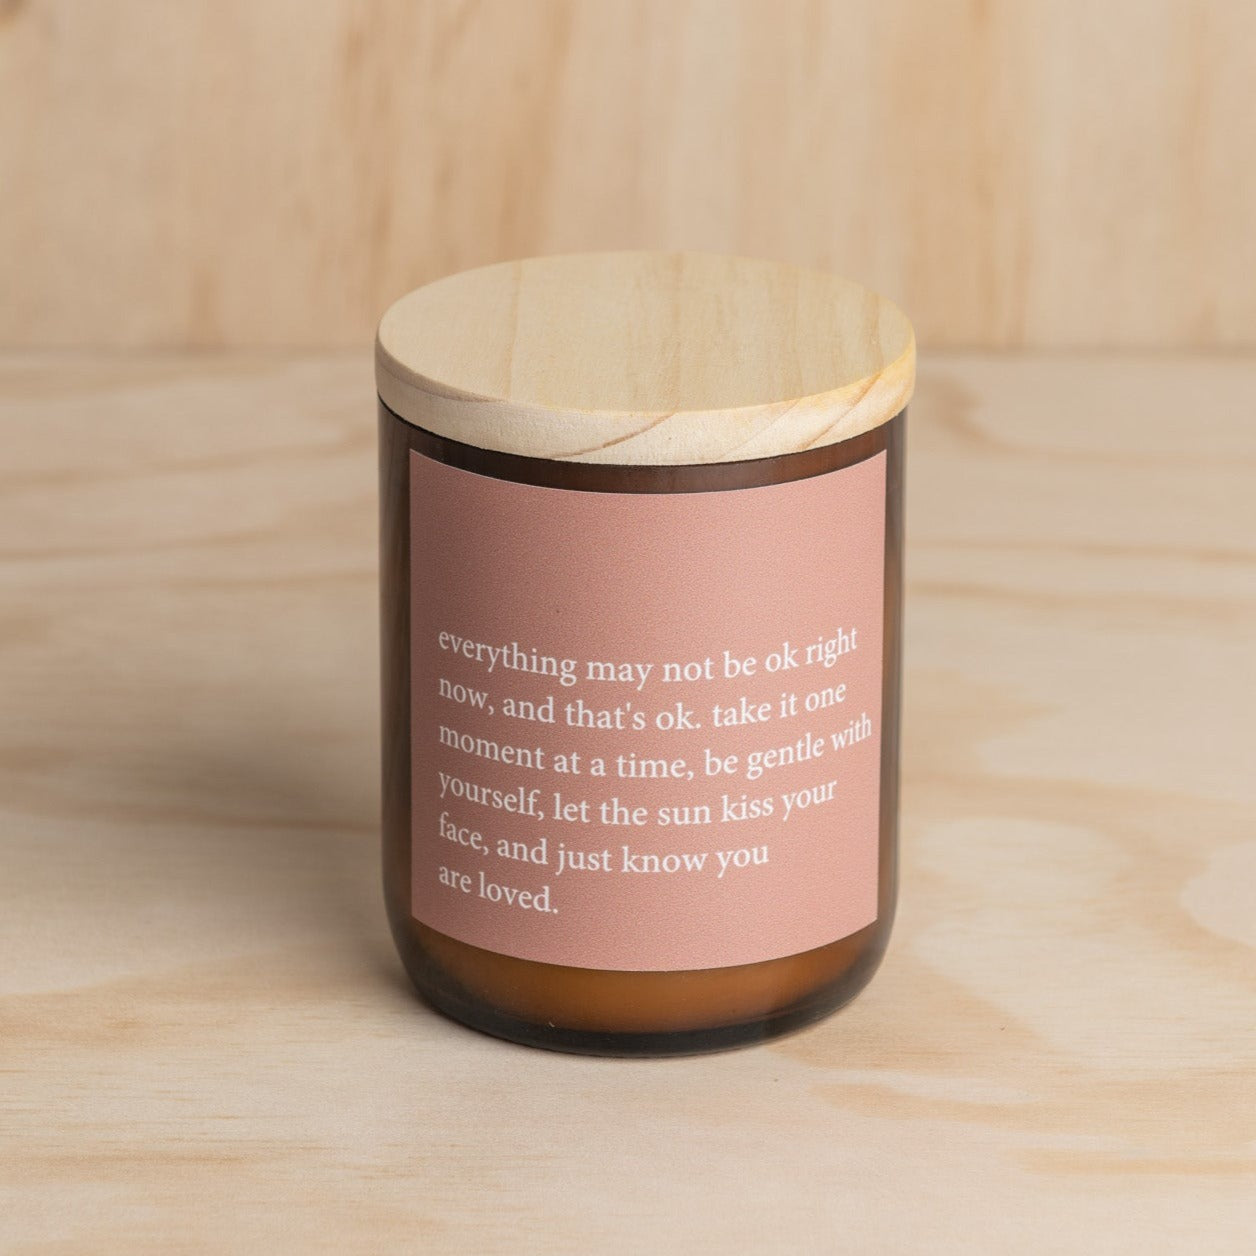 Heartfelt Quote Candle - everything may not be ok